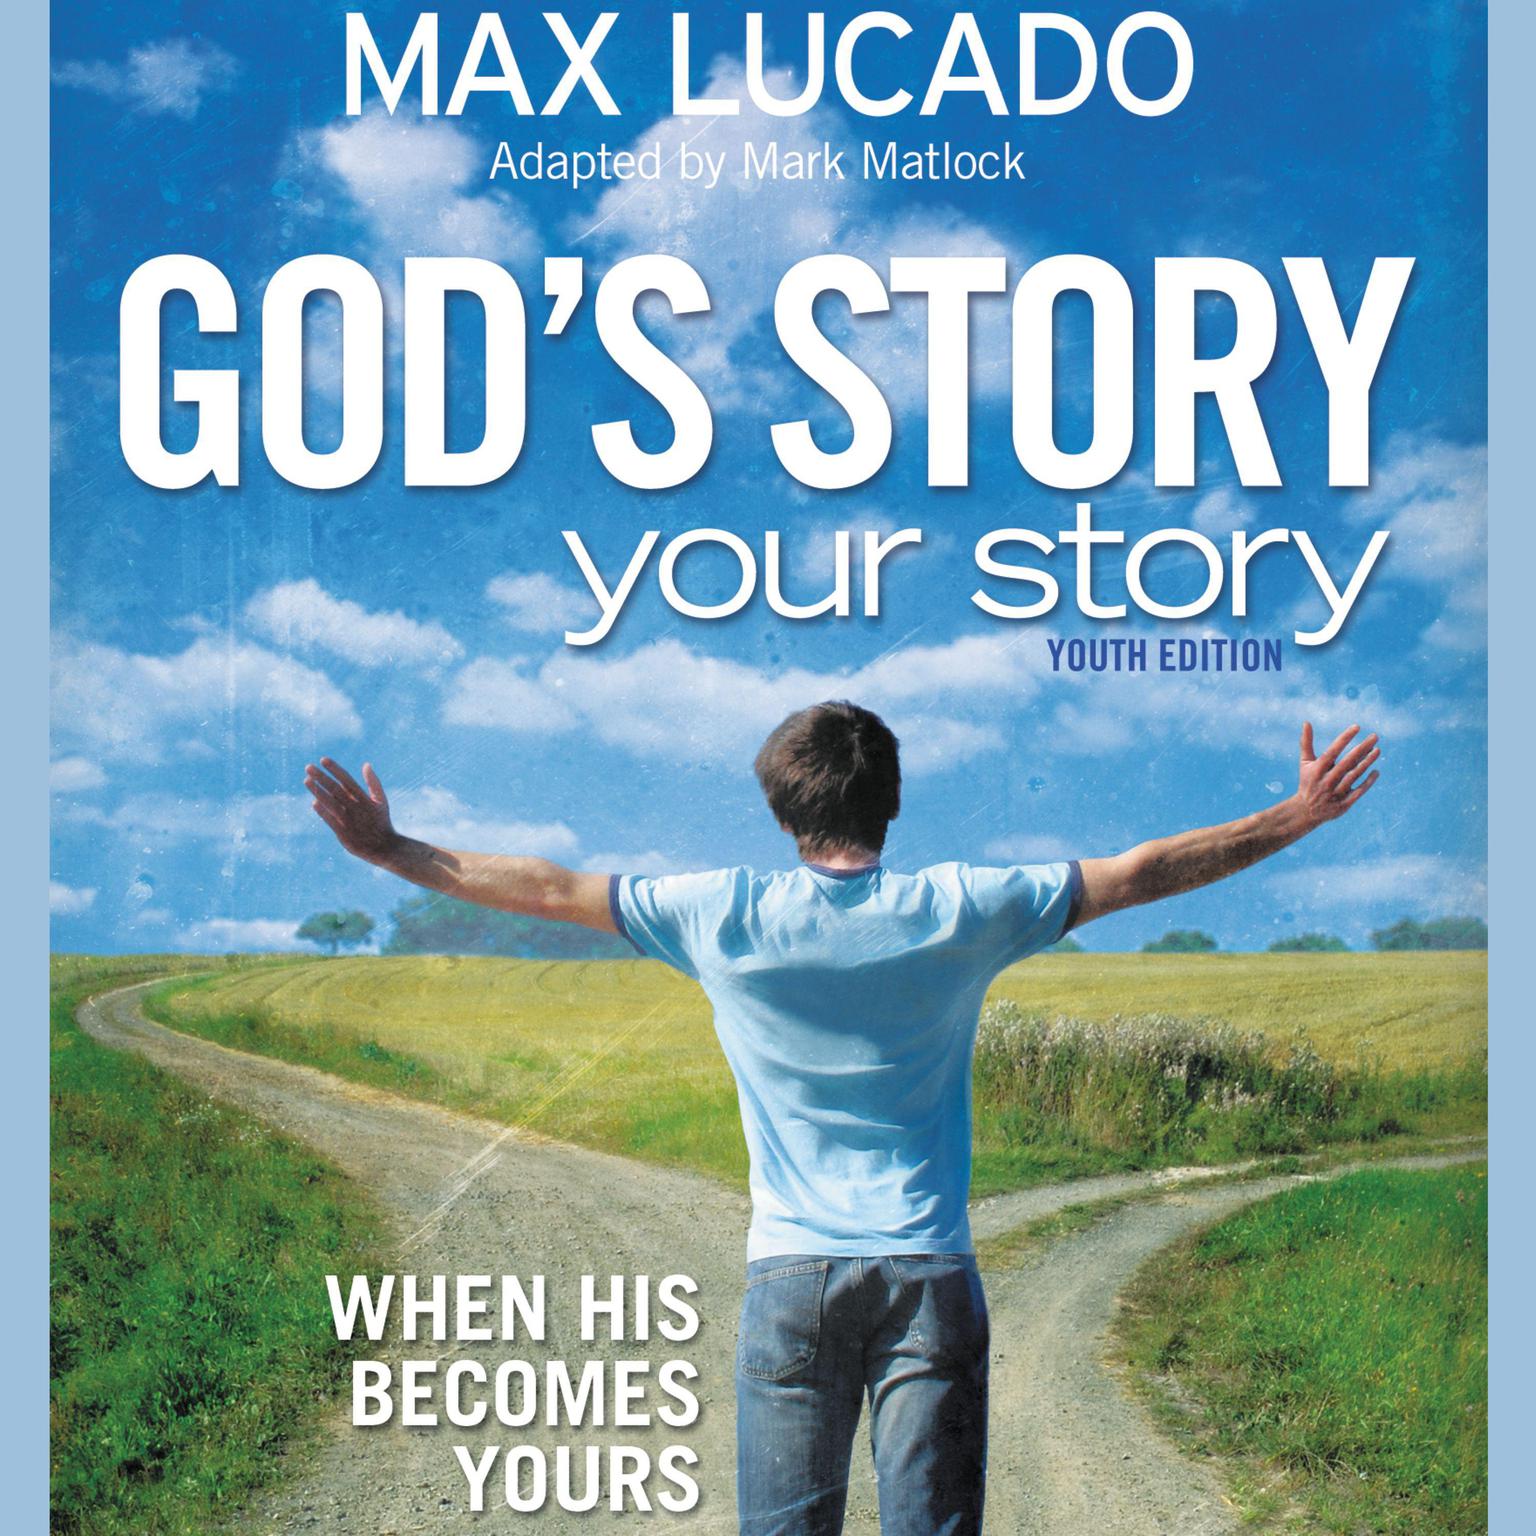 Gods Story, Your Story: Youth Edition: When His Becomes Yours Audiobook, by Max Lucado